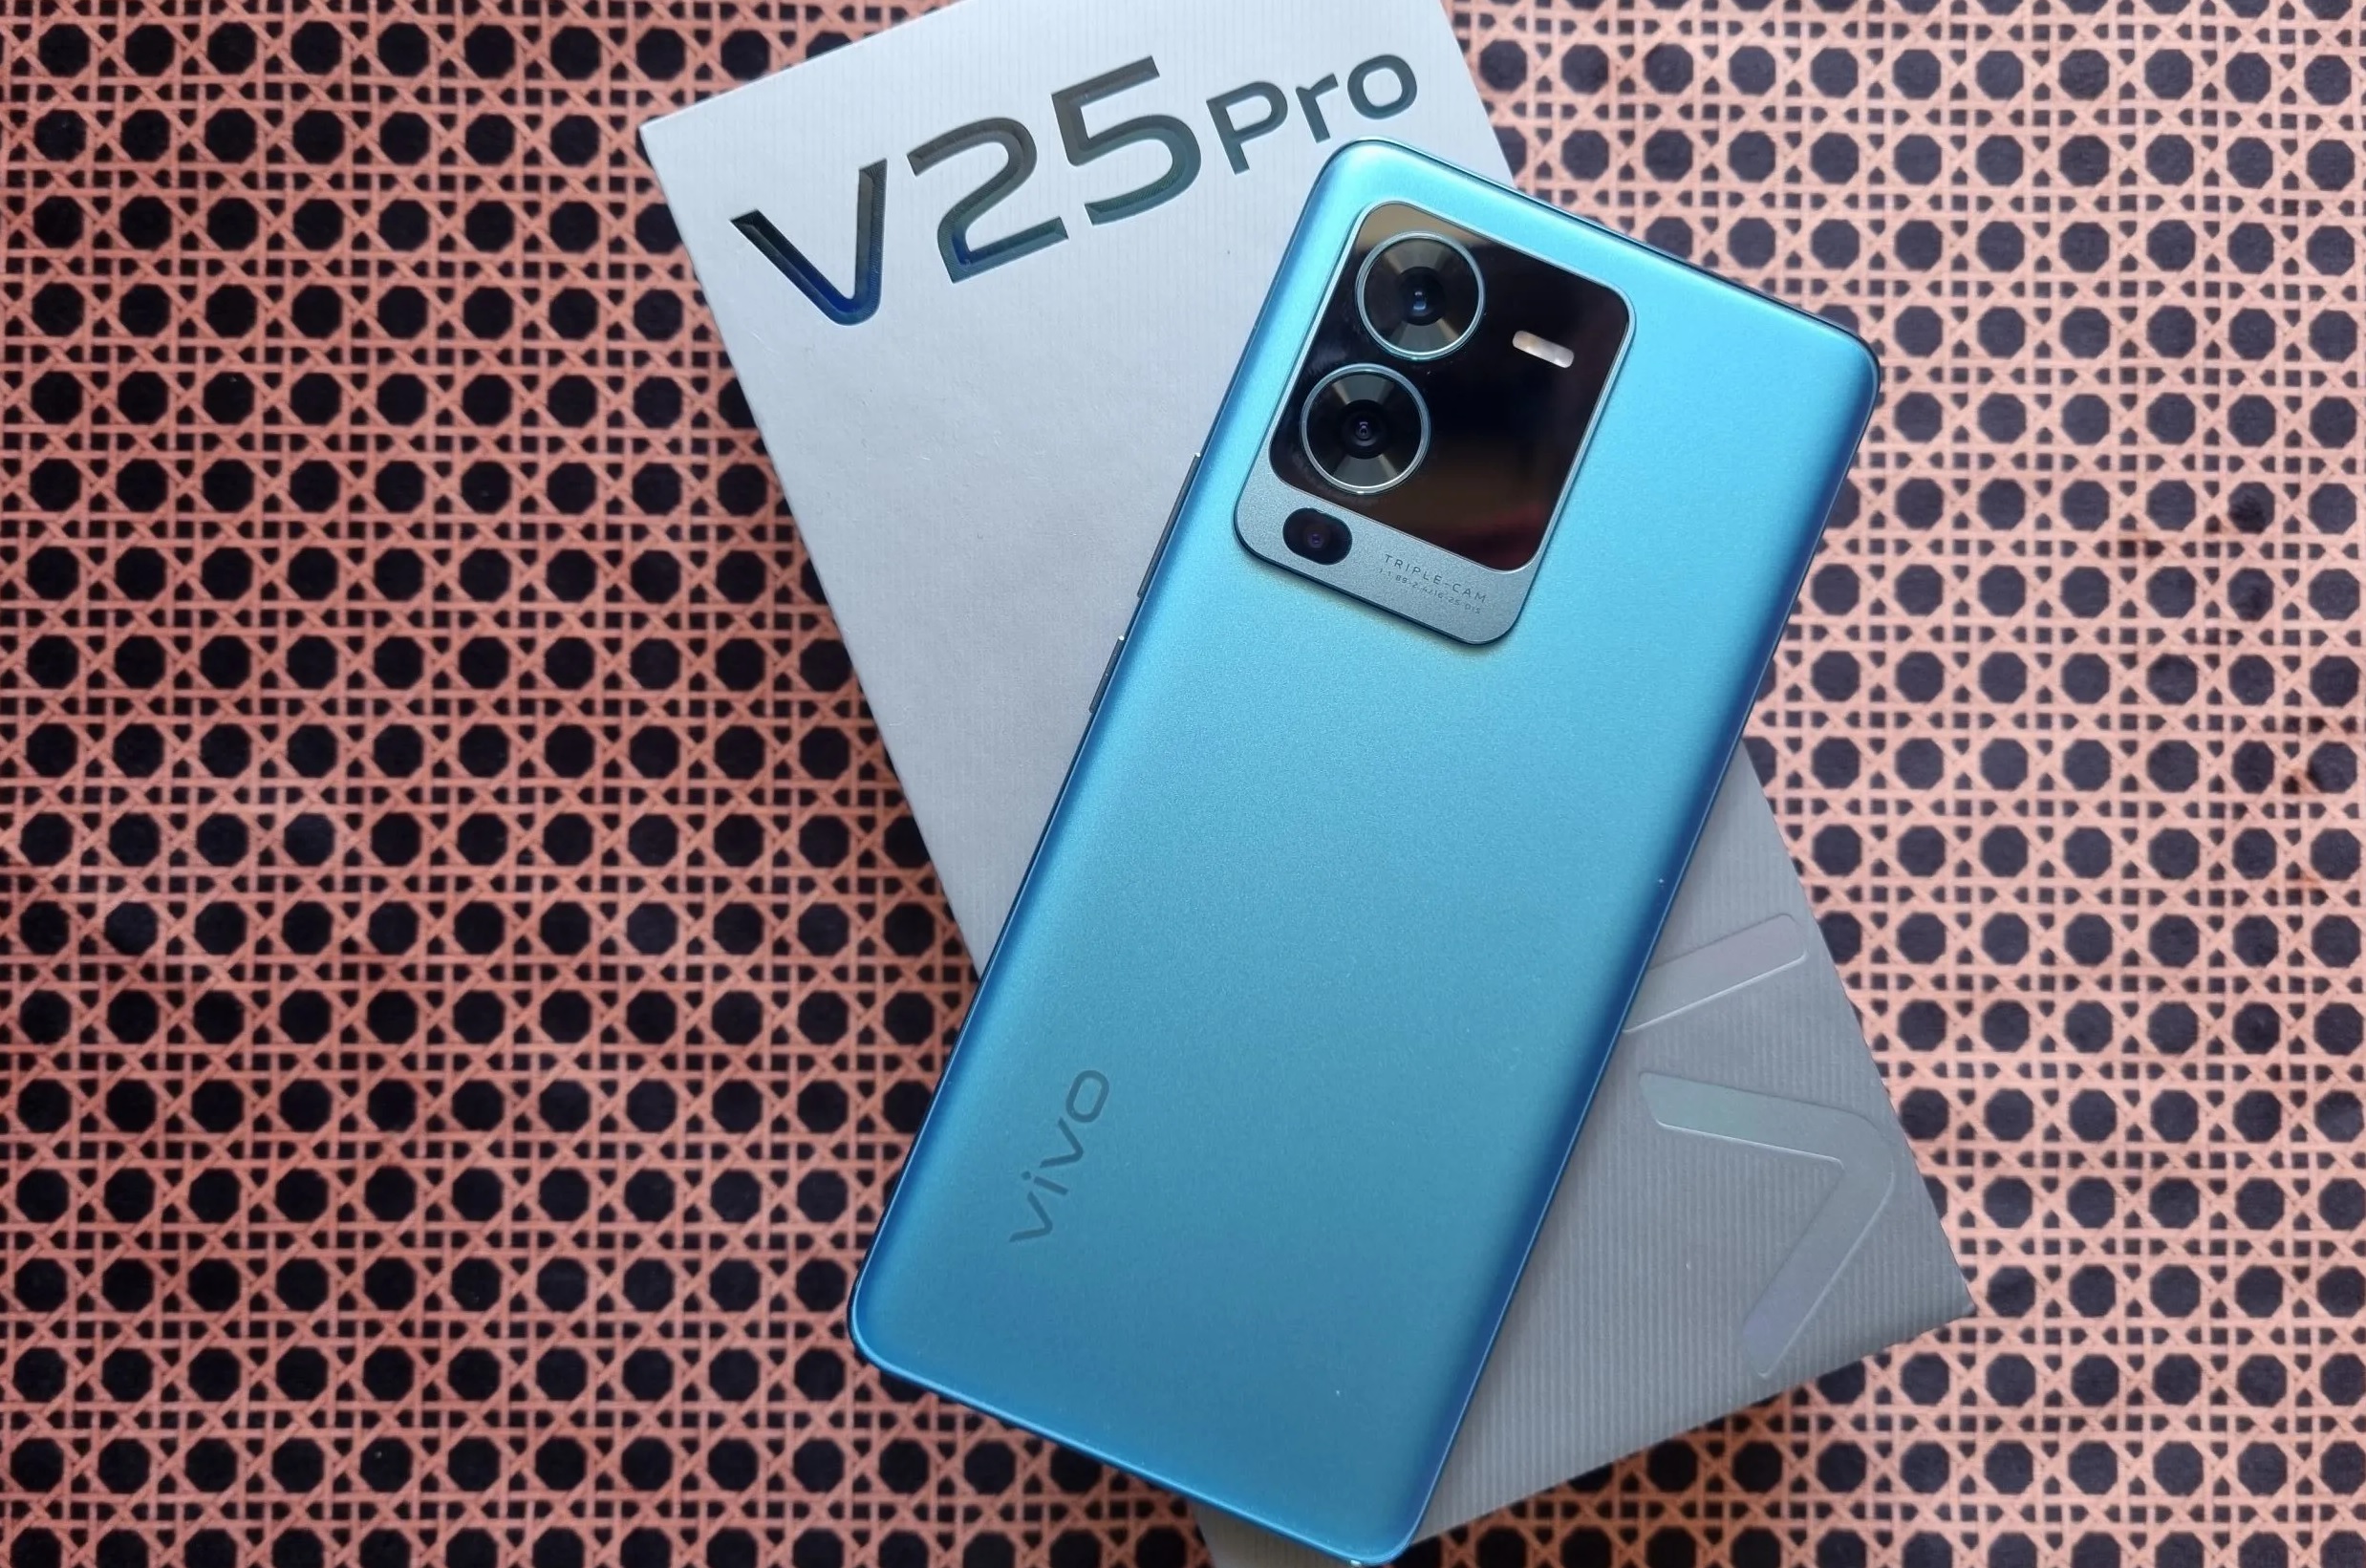 Vivo V21 5G review: unboxing and first impression after four days